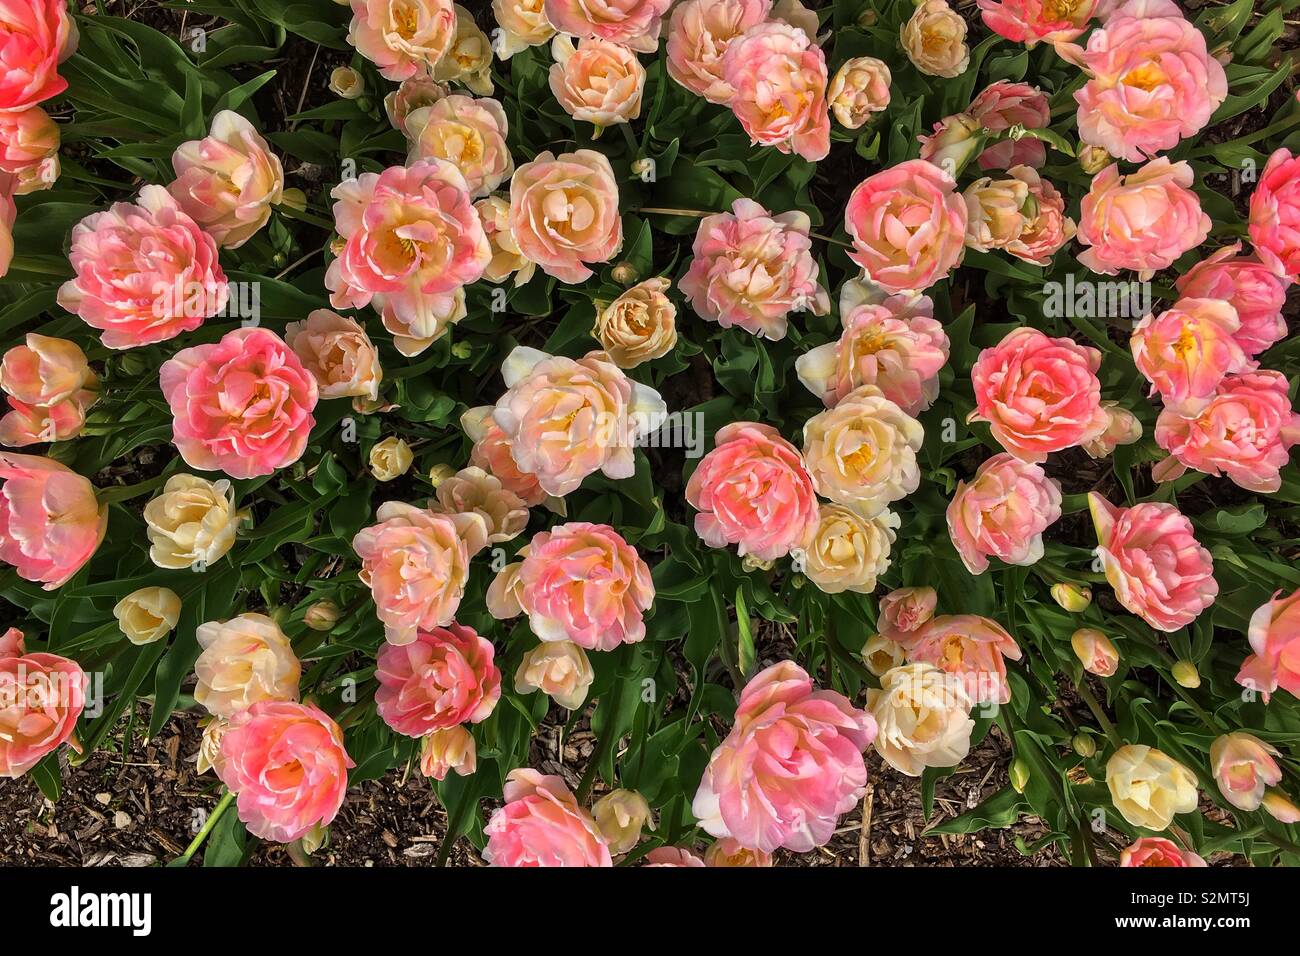 Field of pink carnations in full bloom. Stock Photo